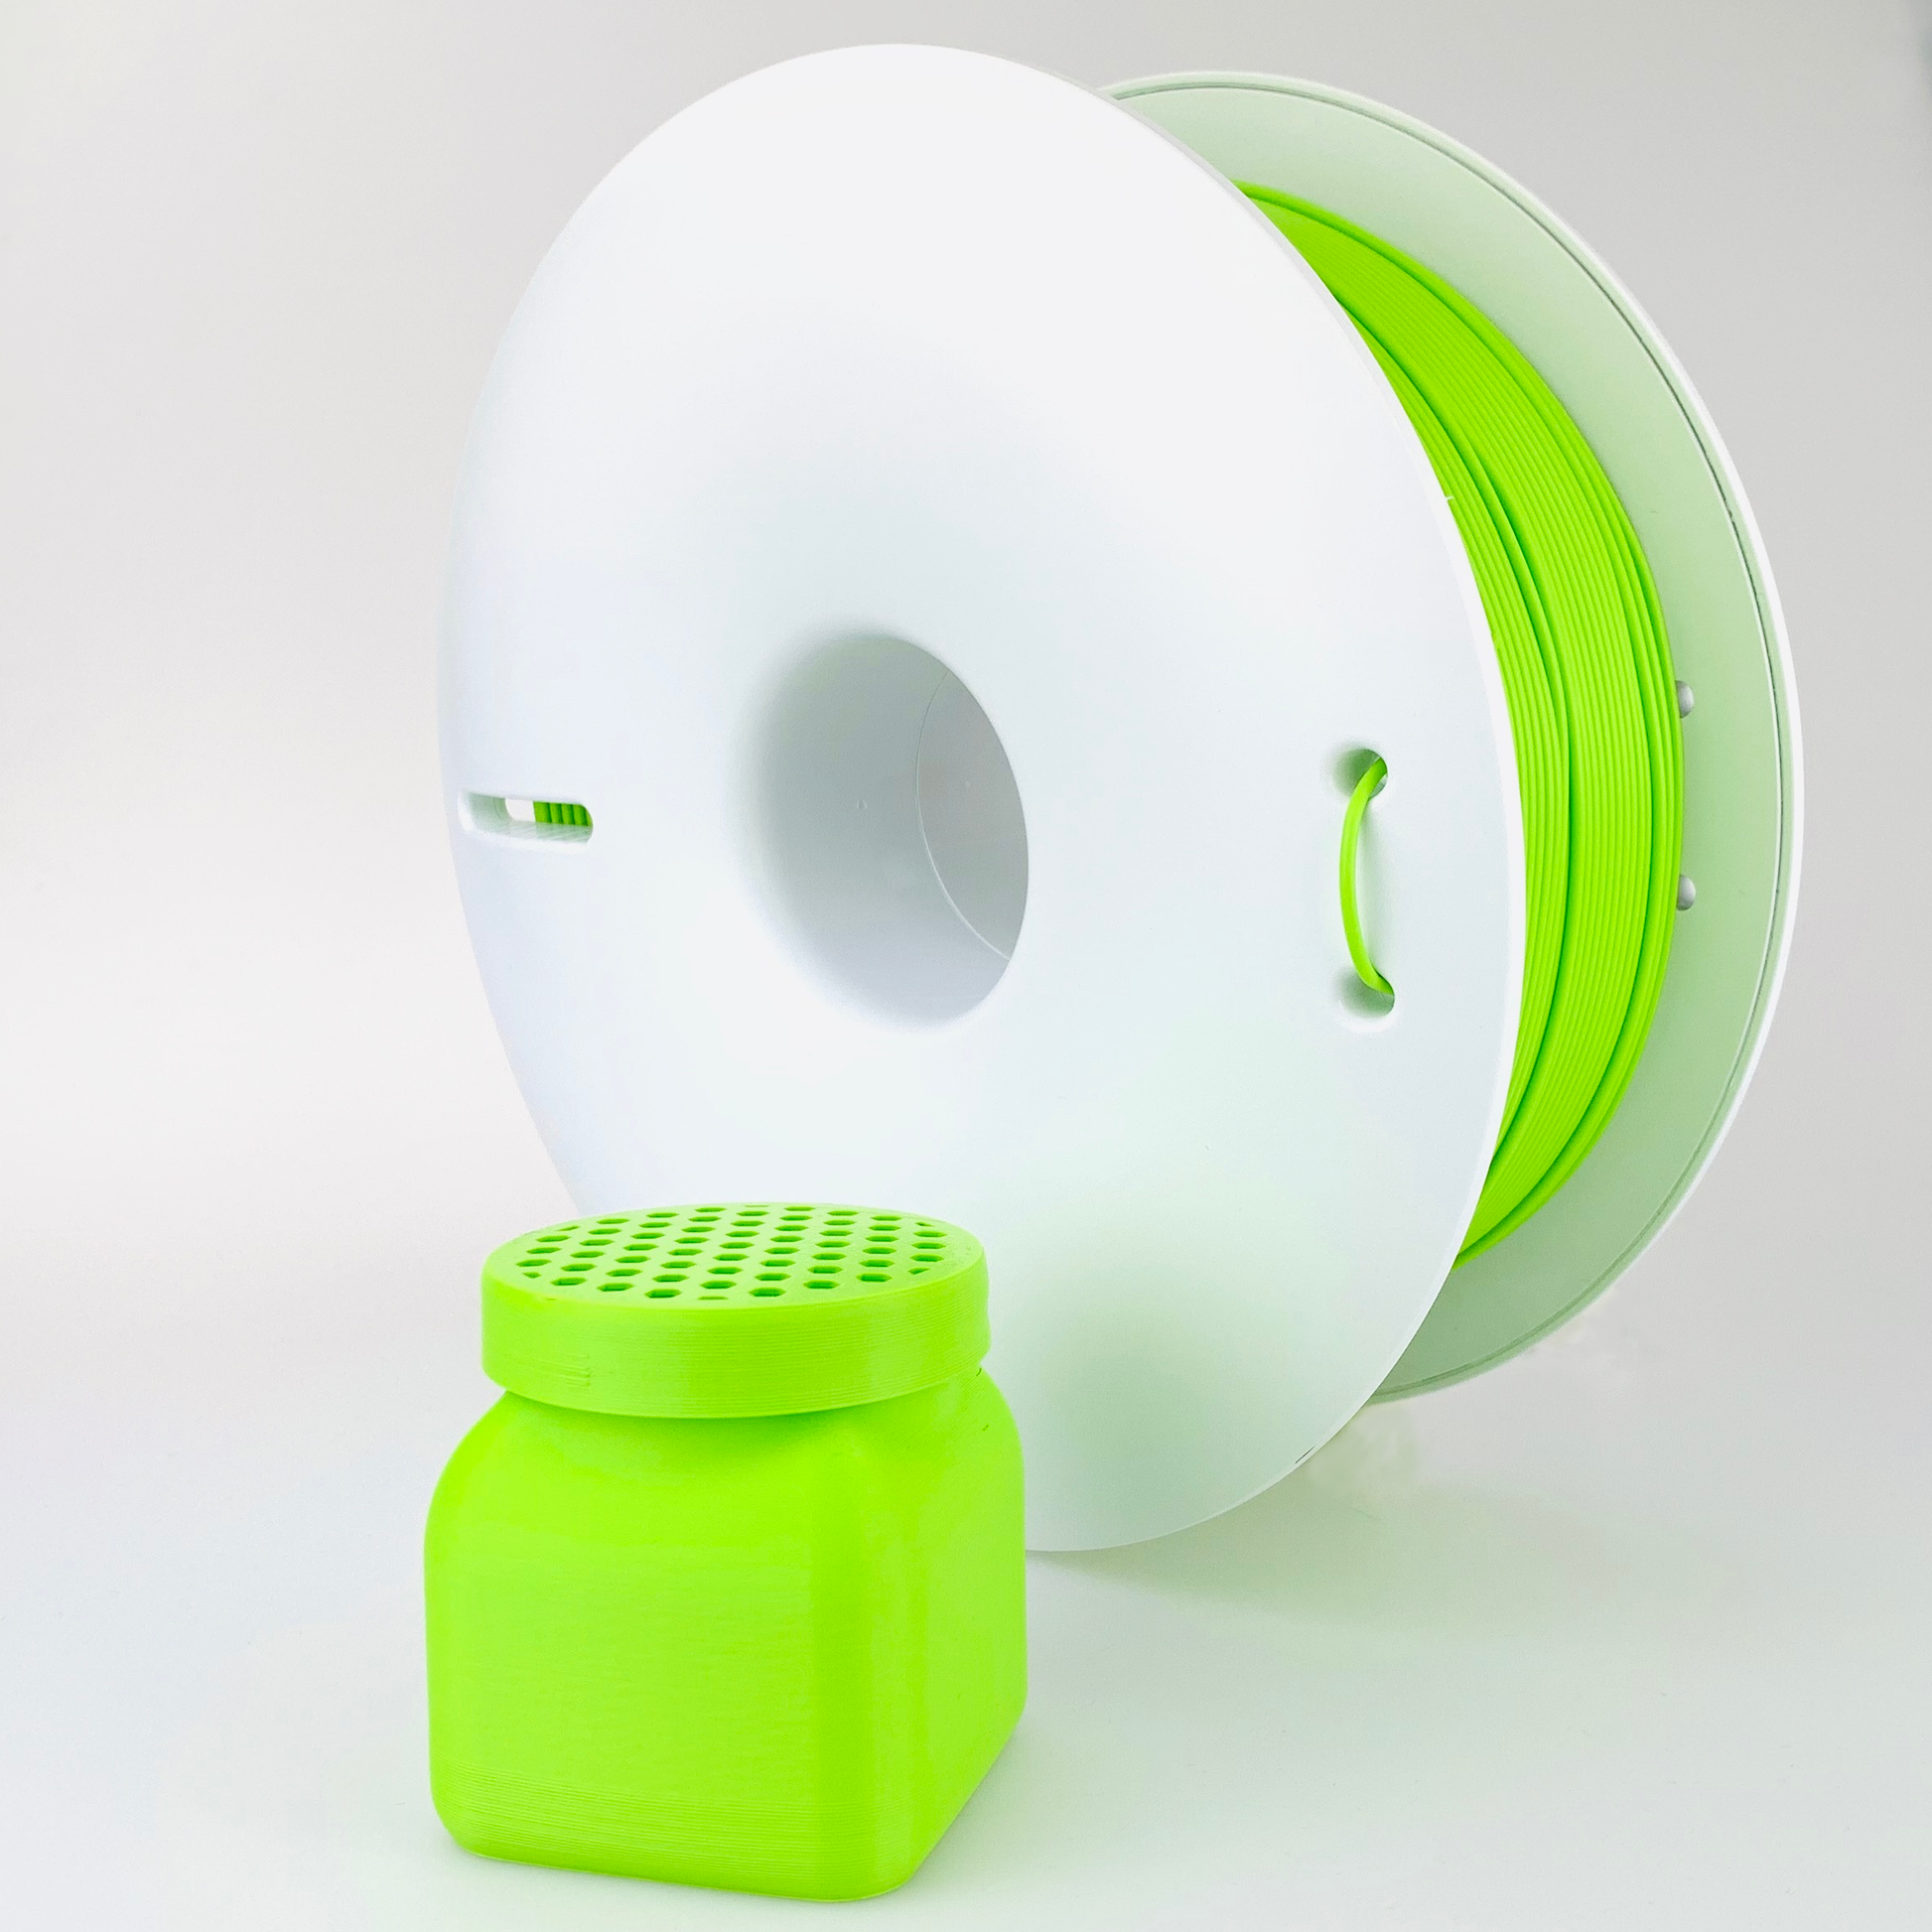 Fiberlogy Polypropylene in Light Green with printed canister